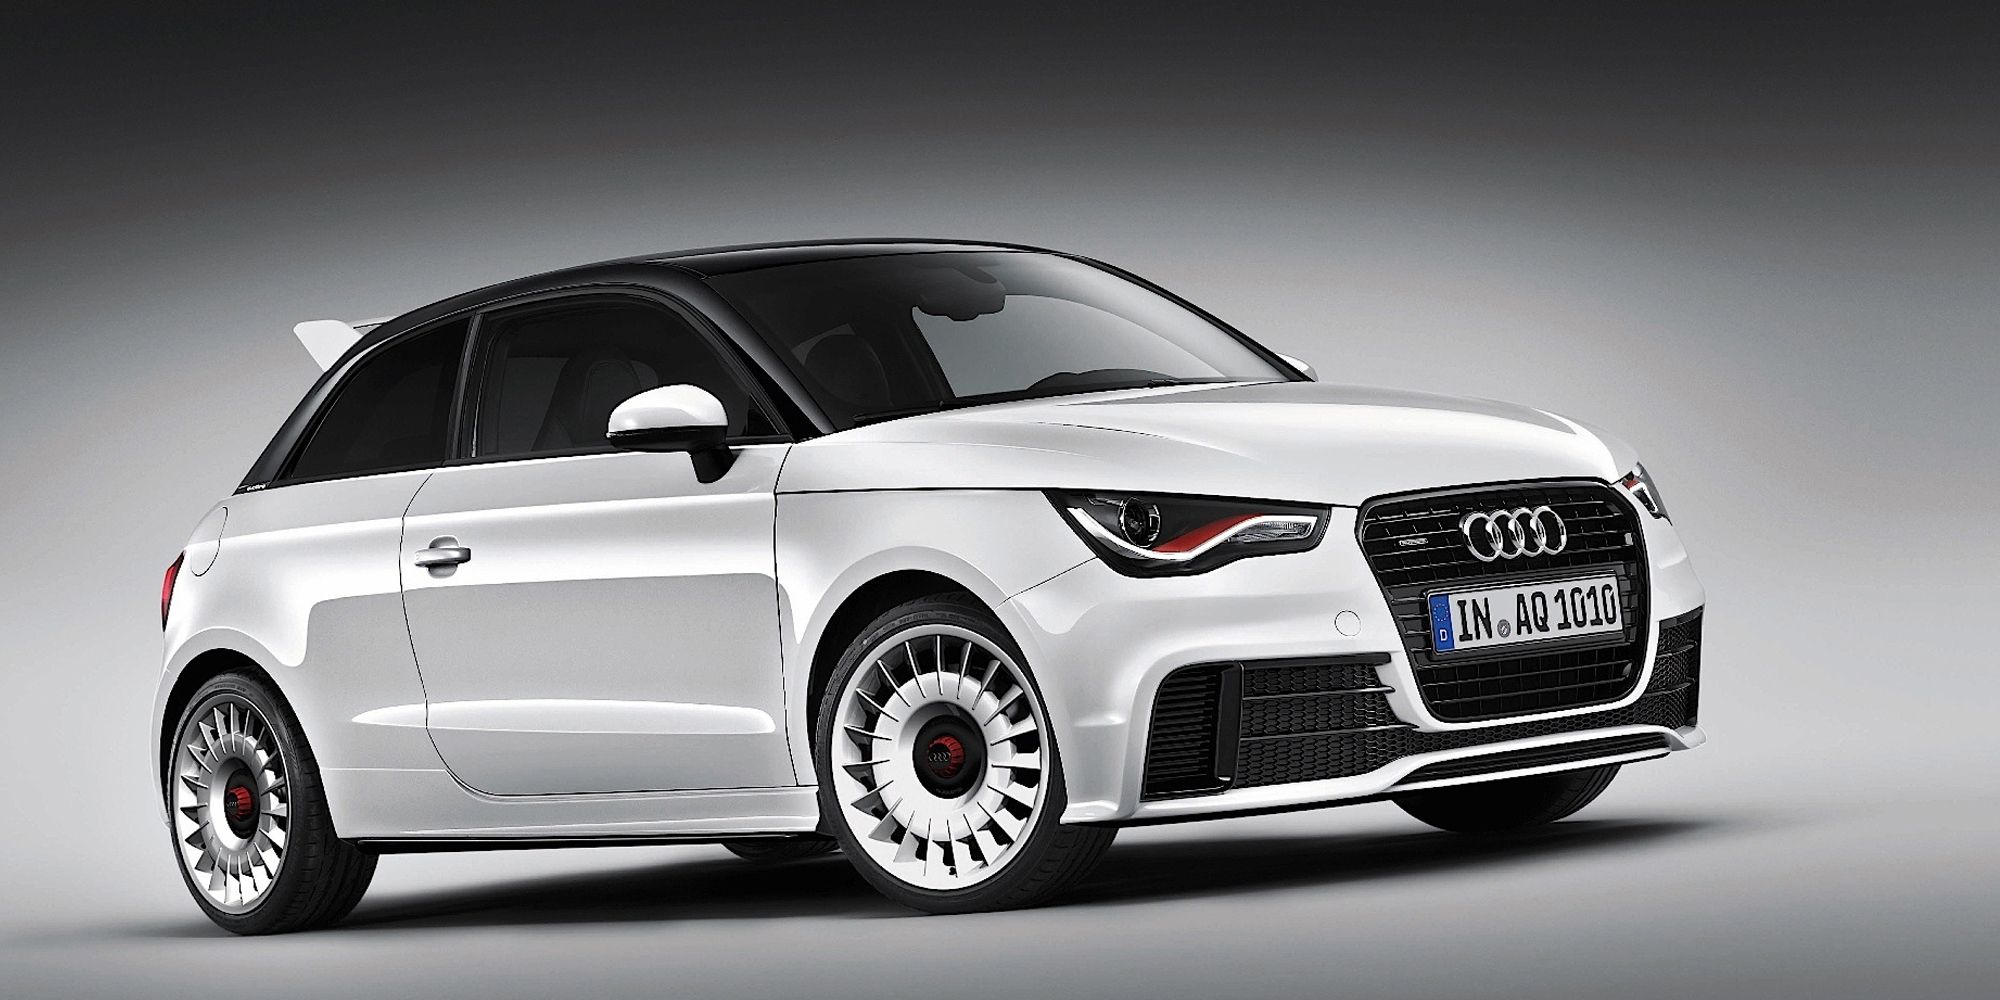 The front of the Audi A1 Quattro